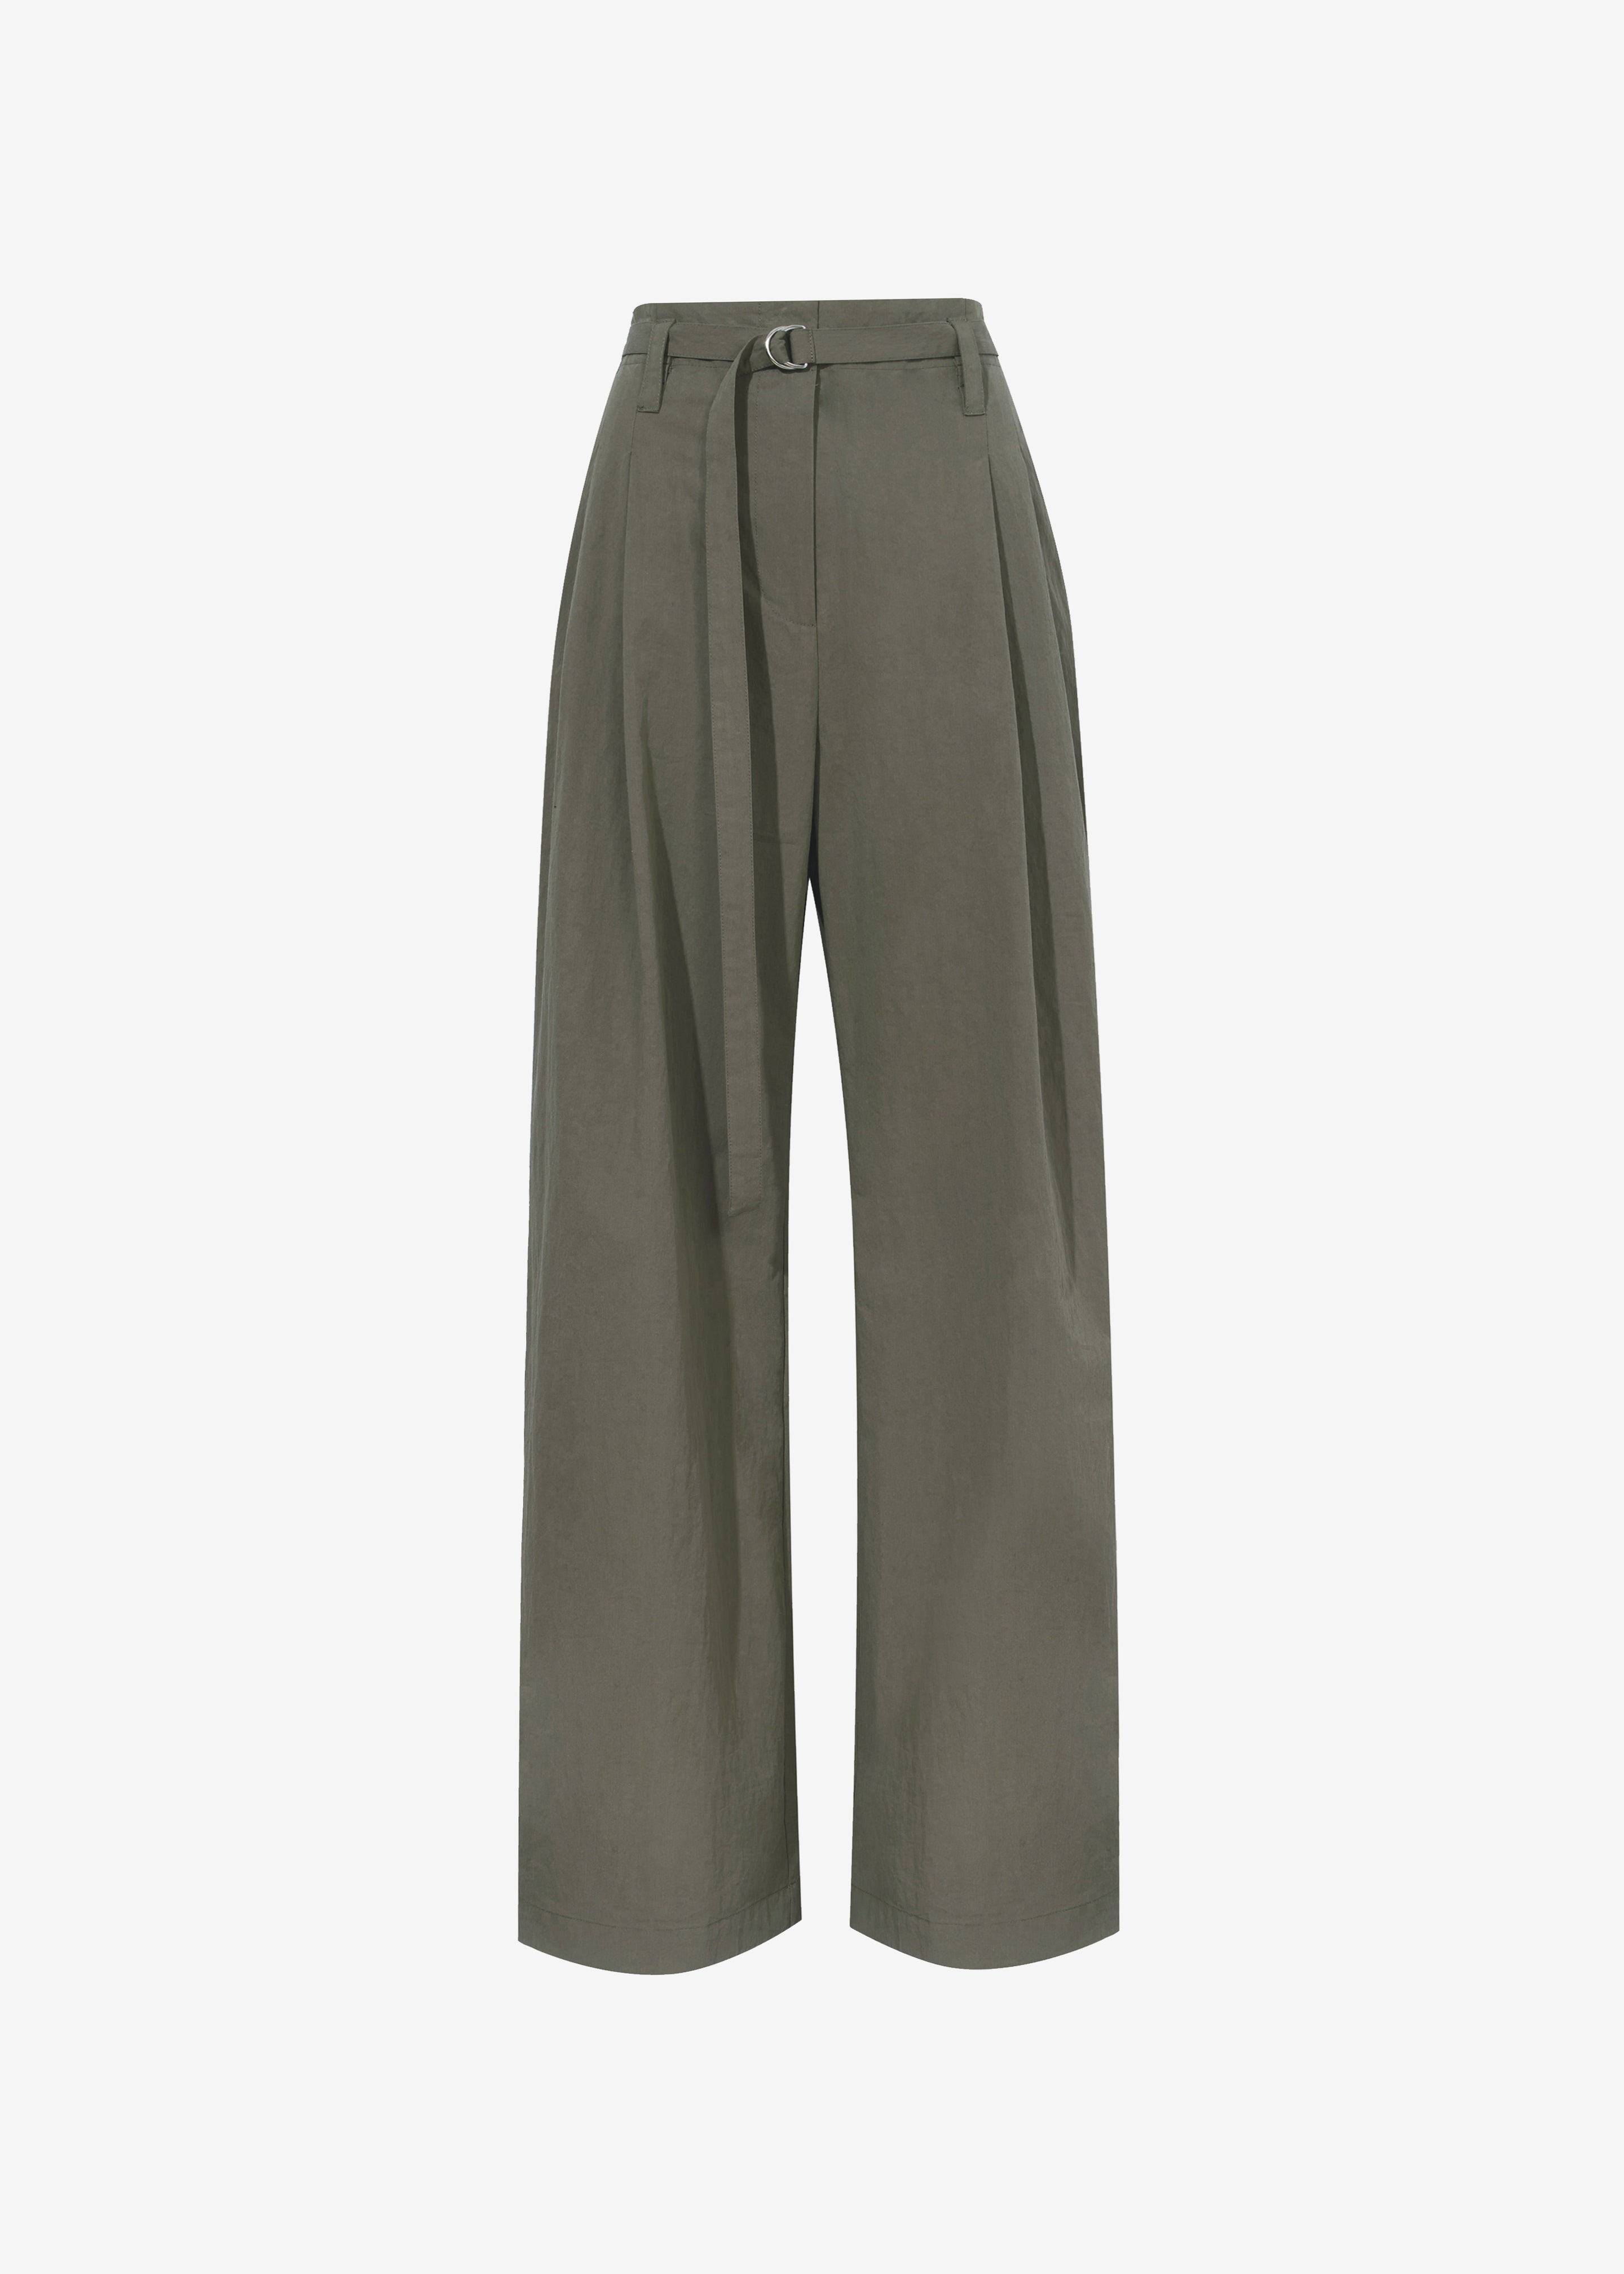 Proenza Schouler White Label Technical Suiting Wide Leg Trousers - Wood - 6